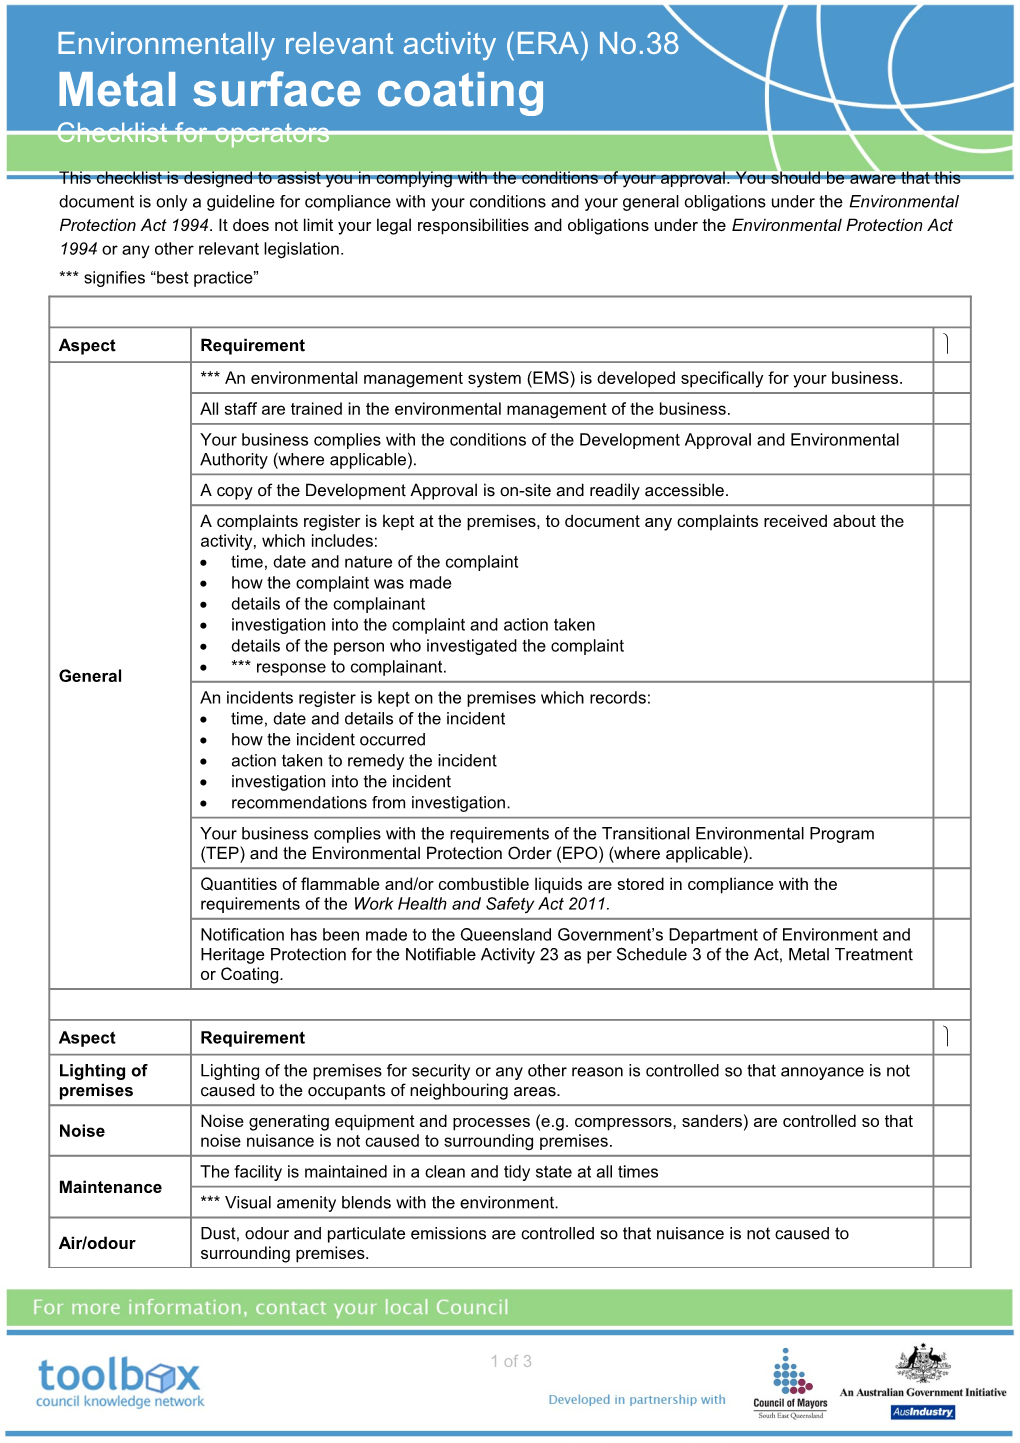 Operator Self Assessment Checklist - Surface Coating